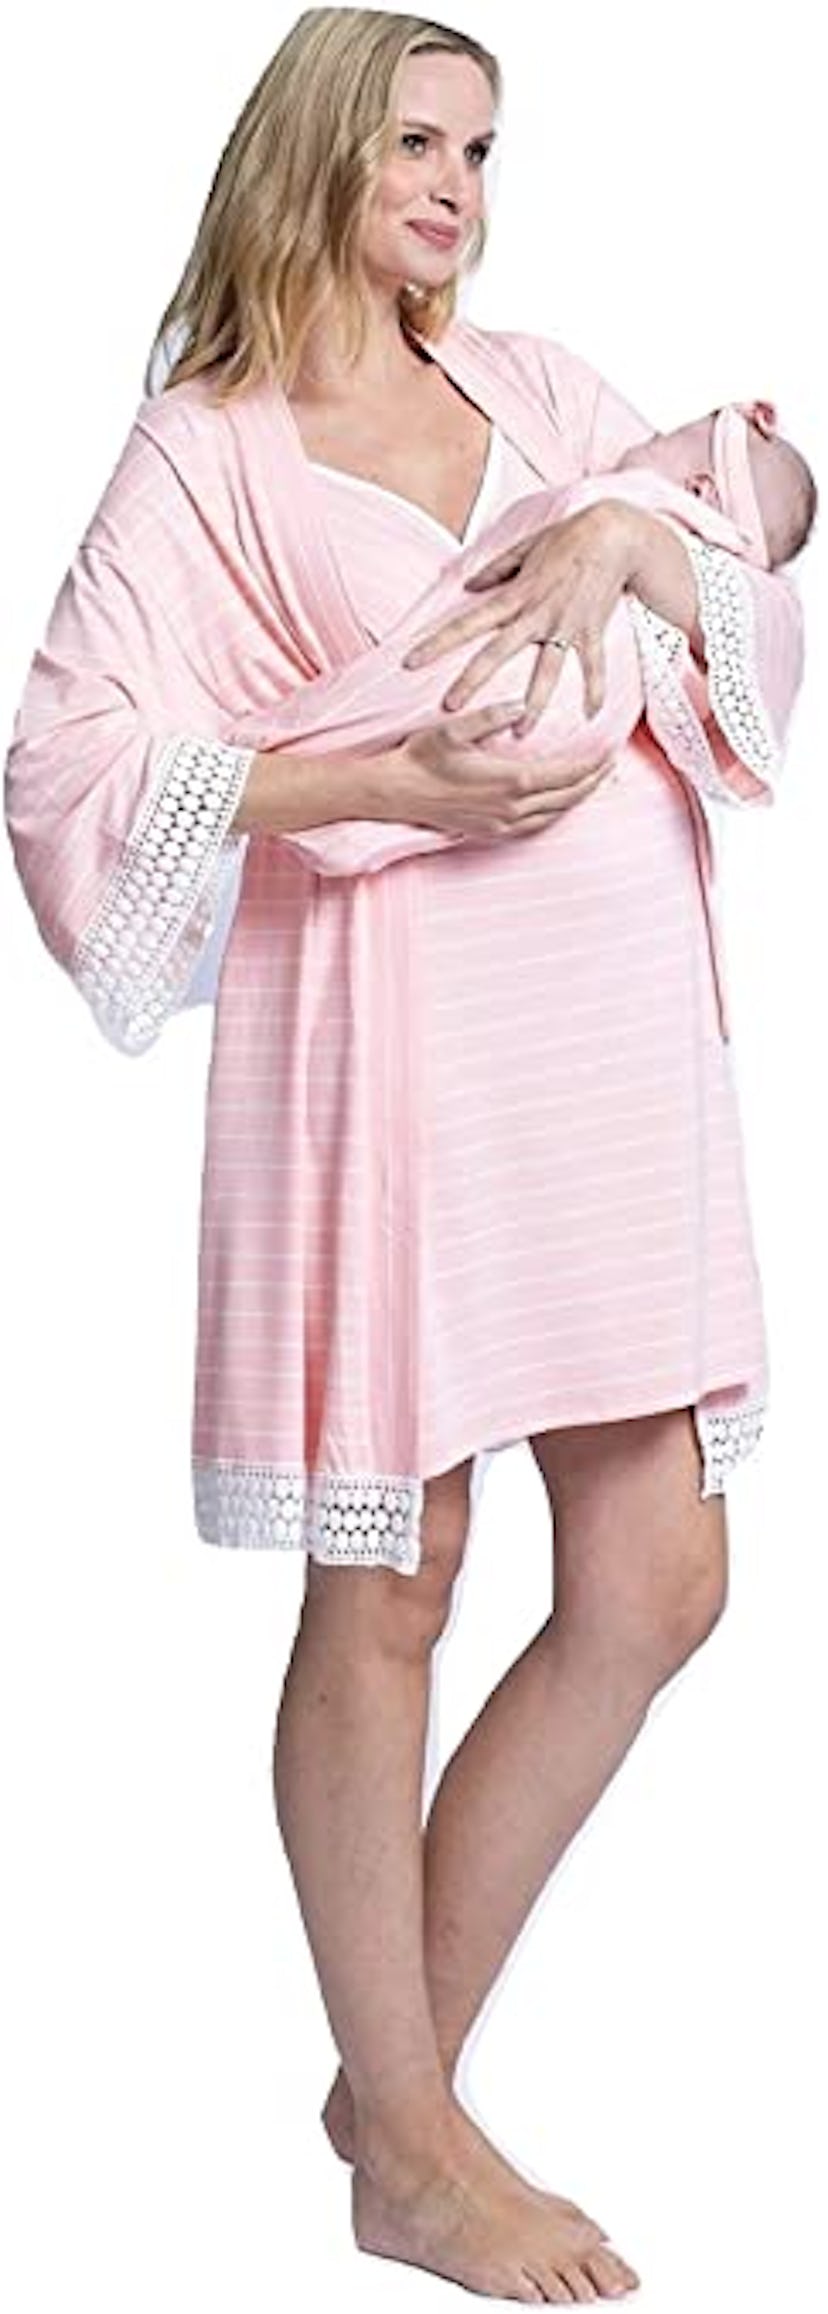 Angel Maternity Hospital Robe for Labor/Delivery With Baby Blanket